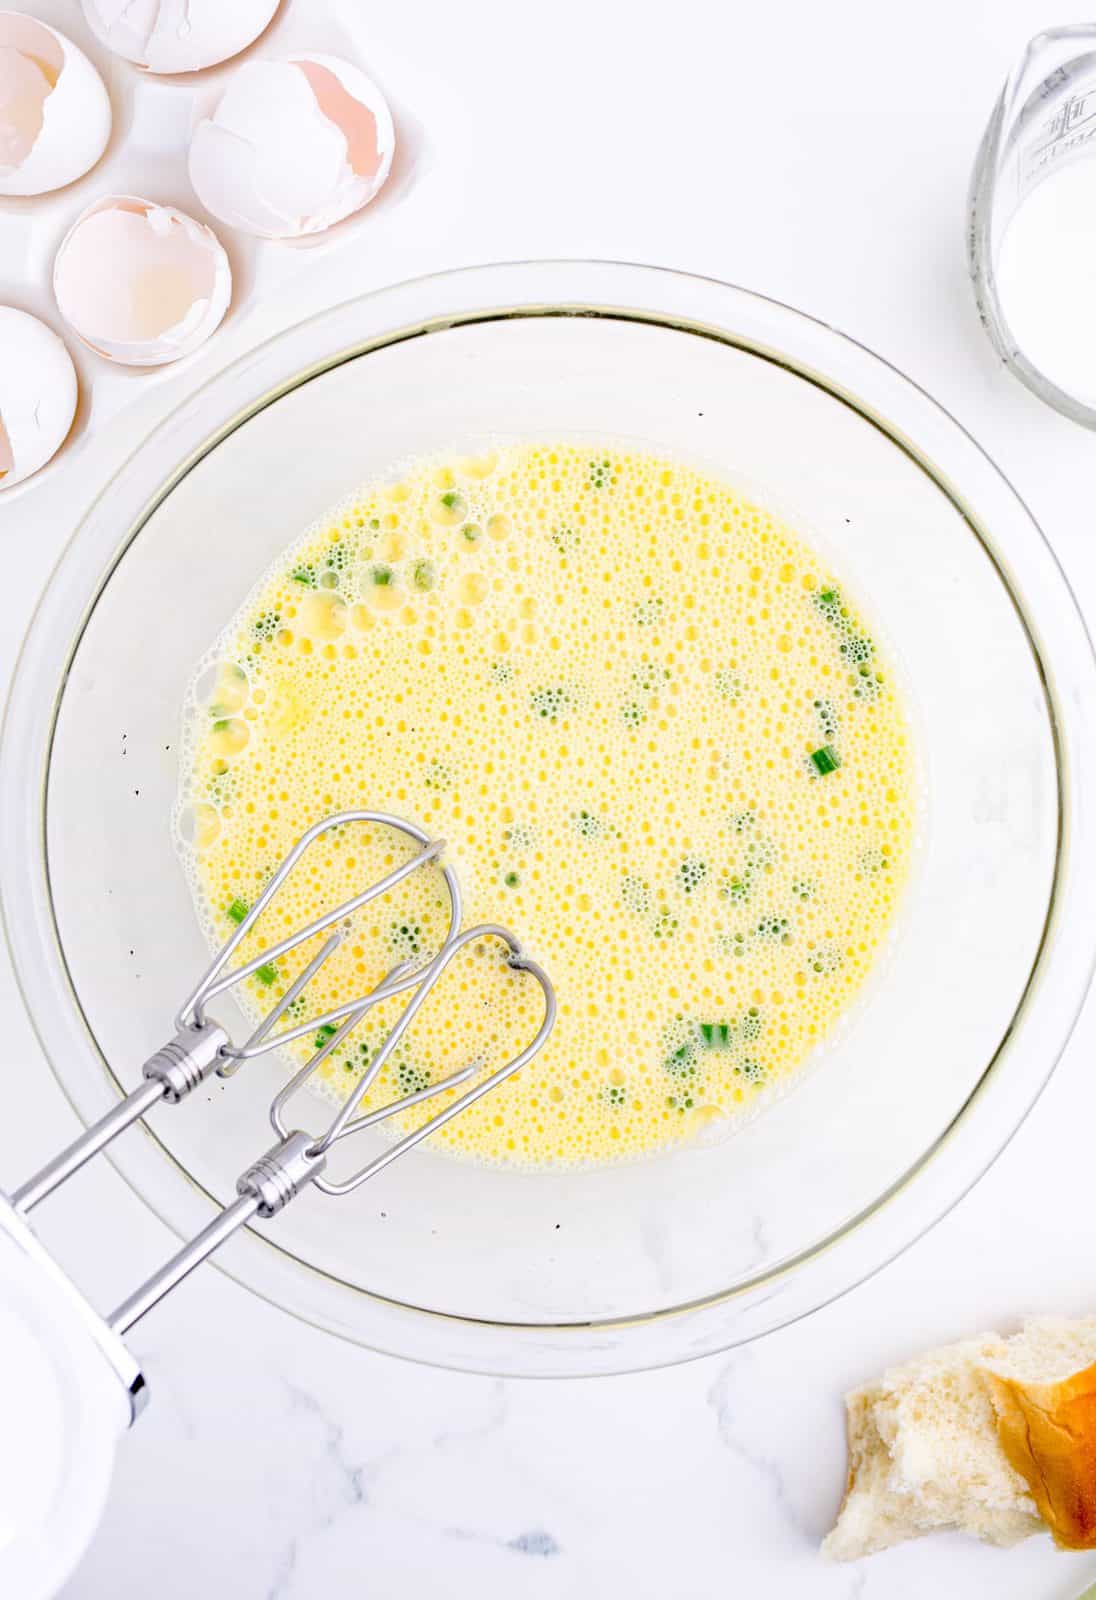 Eggs, milk, chives and pepper whisked together in bowl.